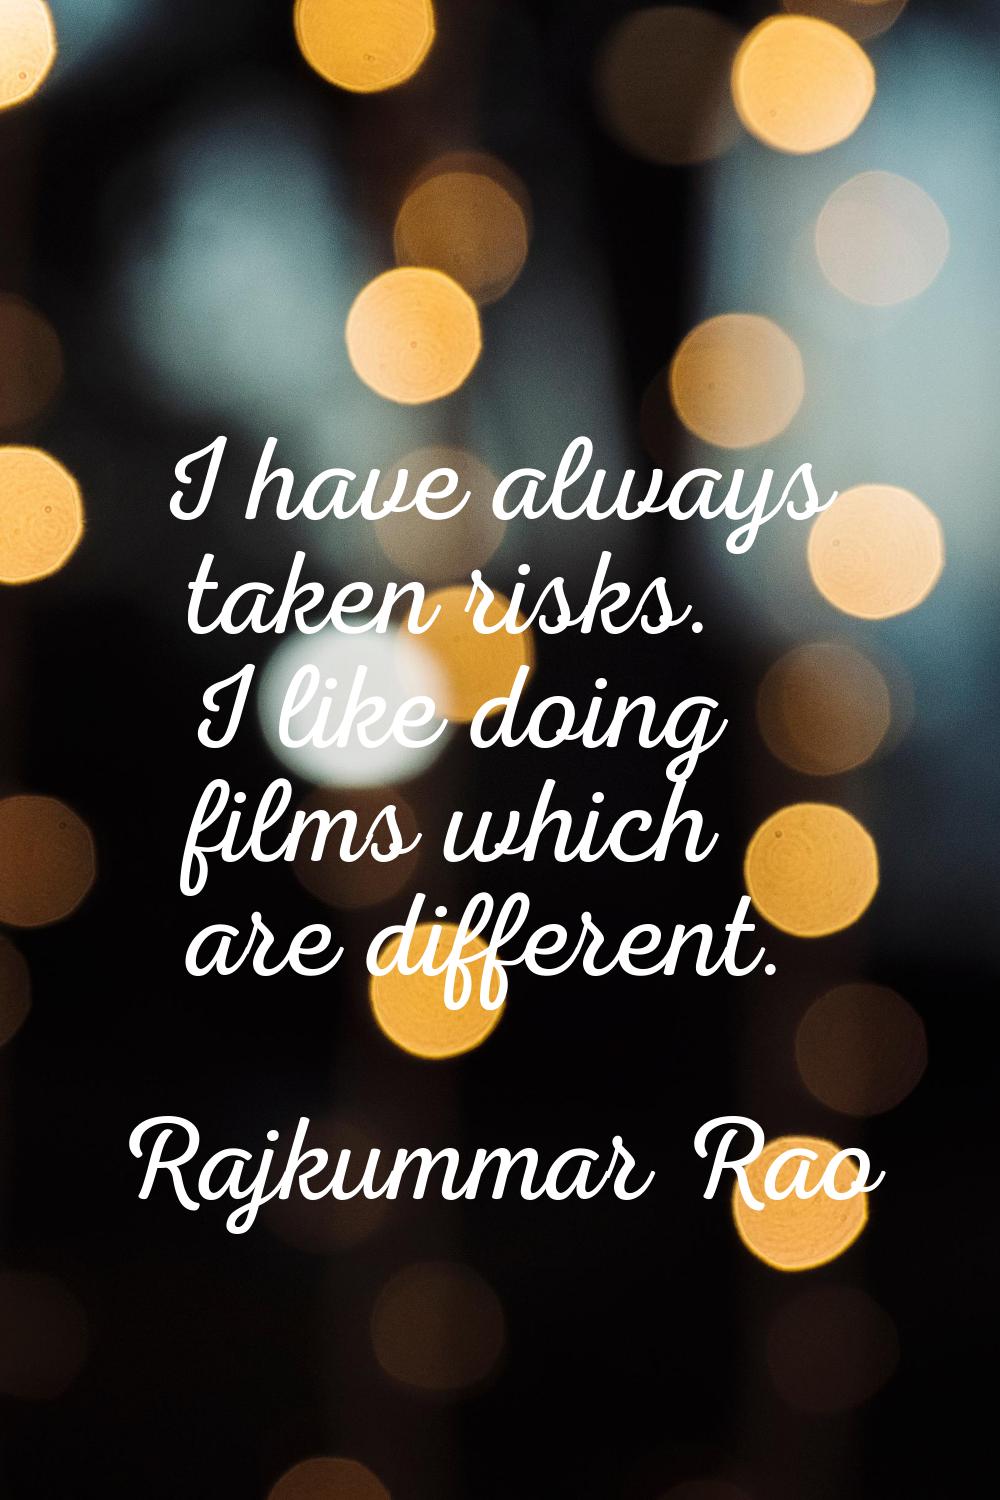 I have always taken risks. I like doing films which are different.